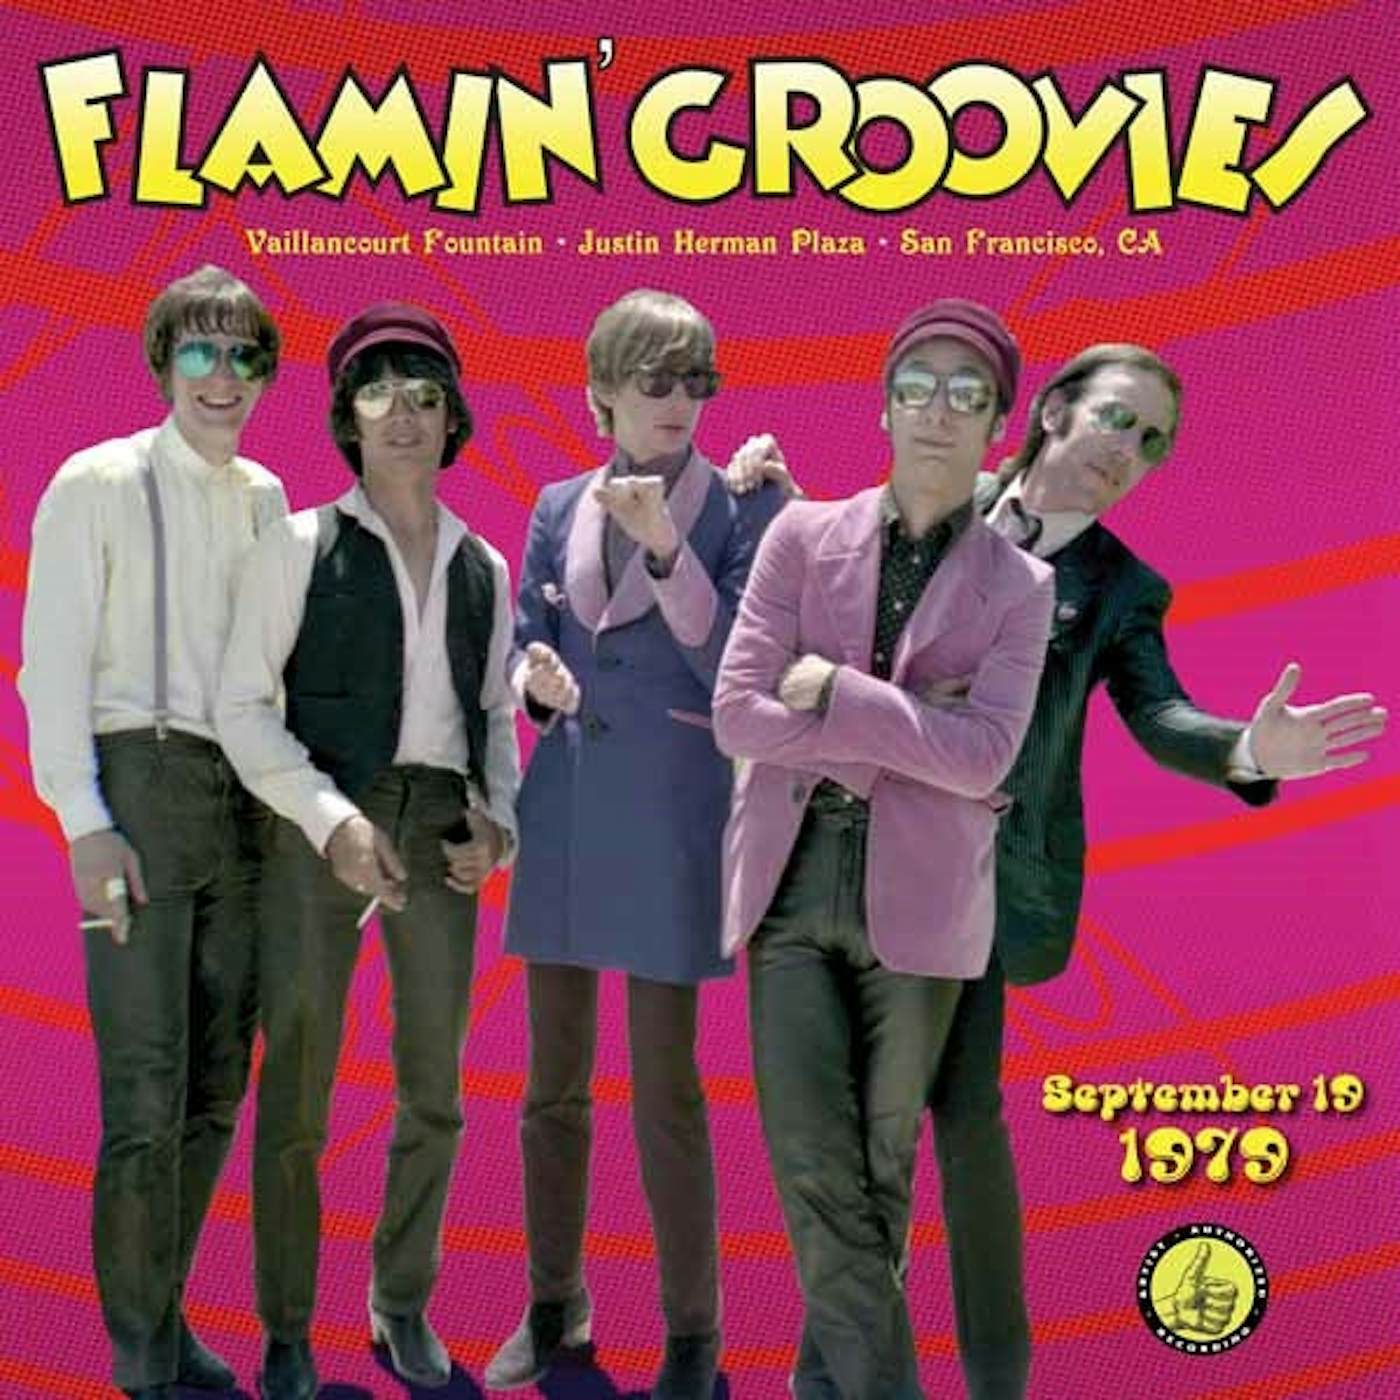 Flamin' Groovies LP - Live From The Vaillancourt Fountains: 9/19/79 (Vinyl)